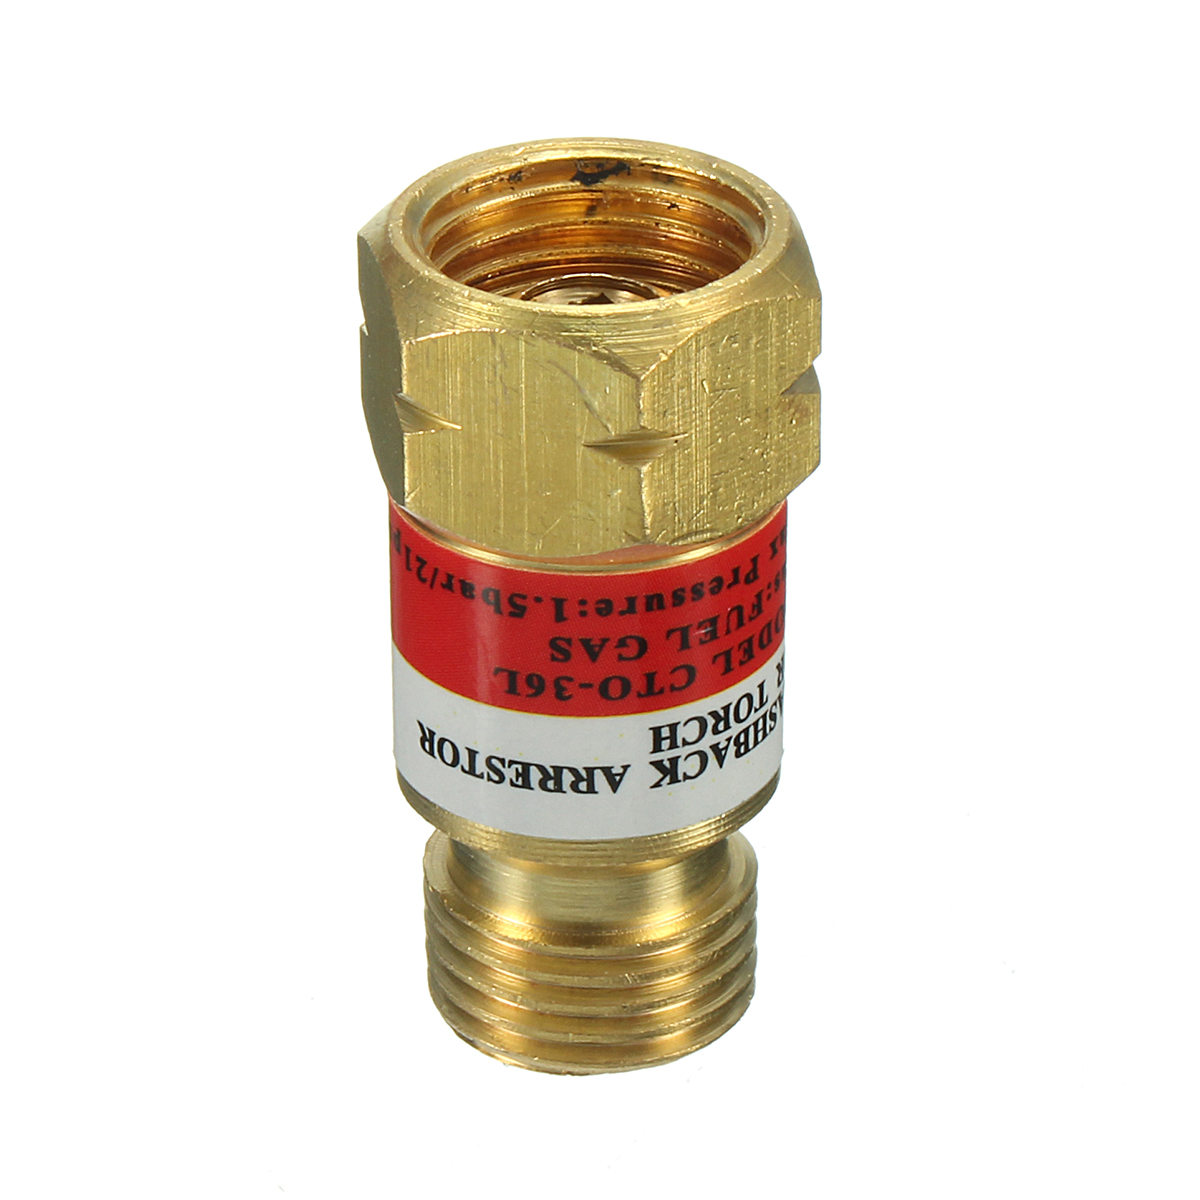 Acetylene-Check-Valve-Set-For-Torch-End-Welding-Torch-Cutting-1308851-4